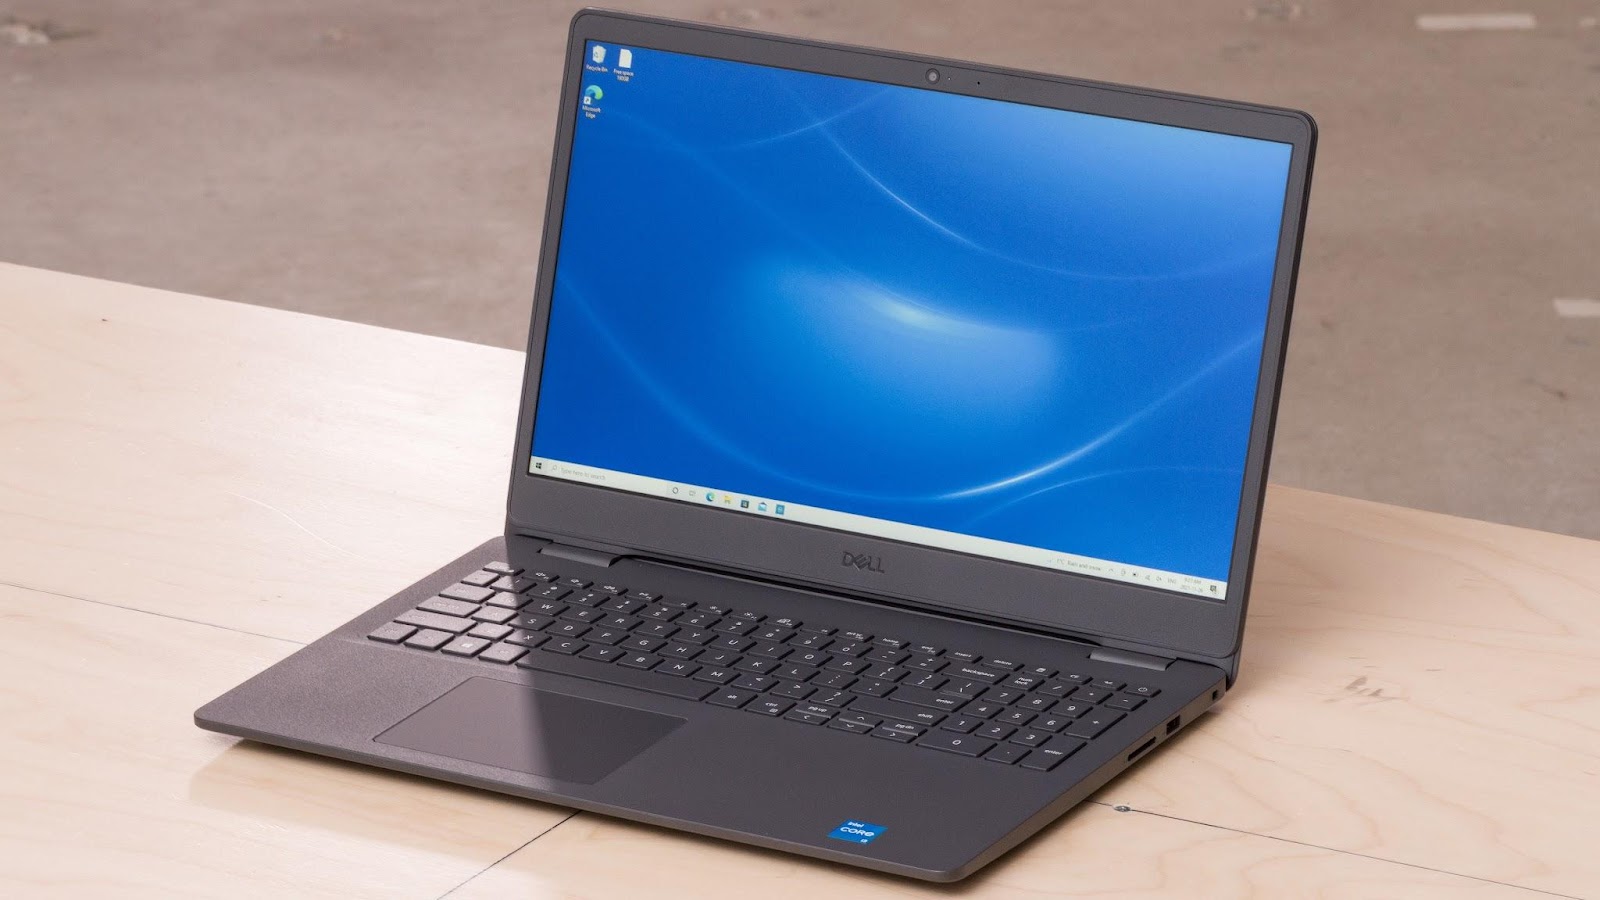 This image shows the Dell Inspiron 15 3000 in the table.